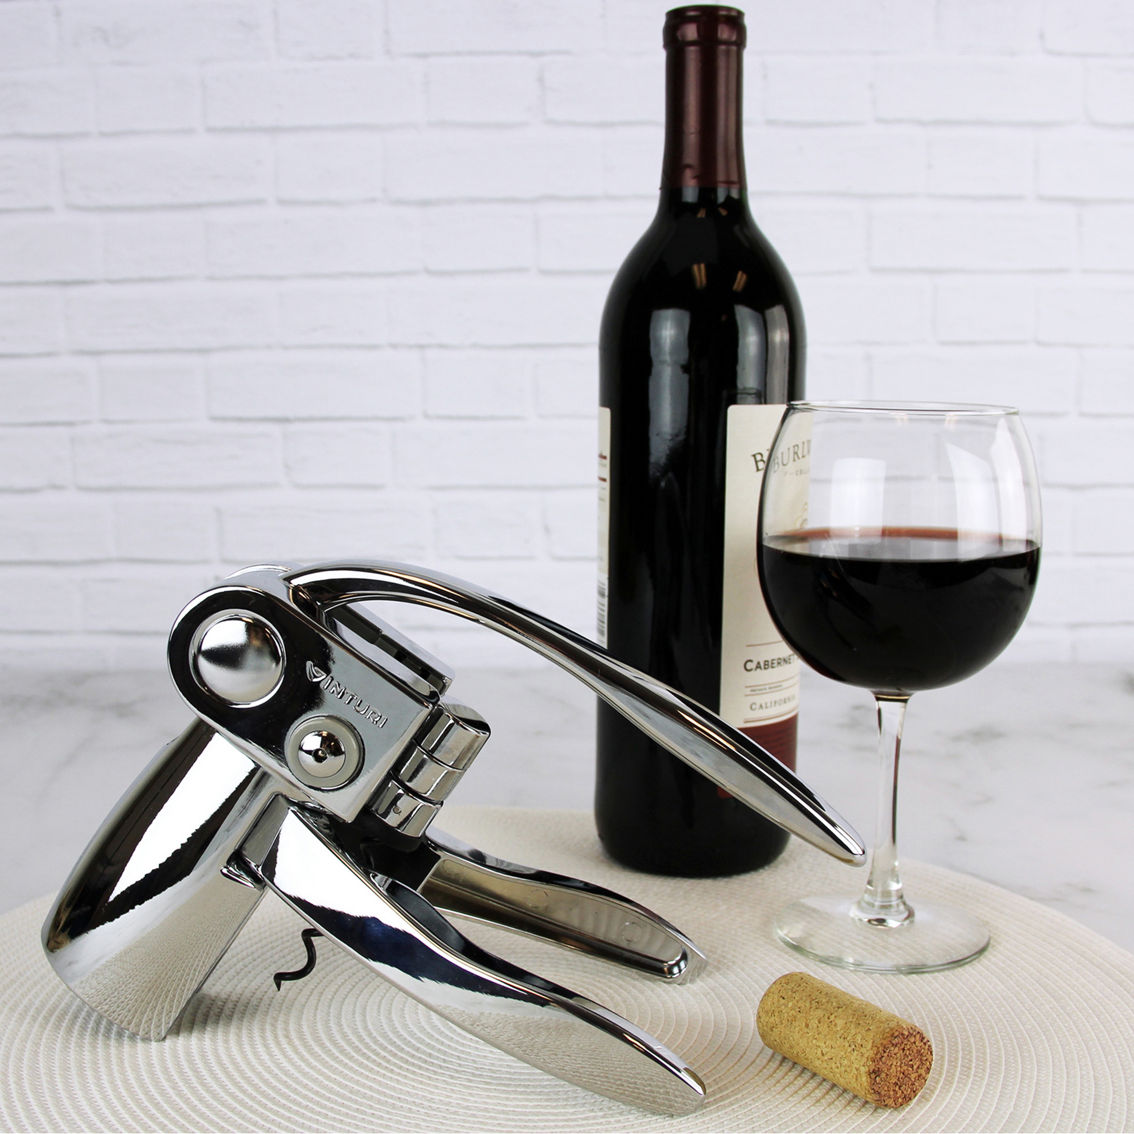 Vinturi Traditional Wine Lever Opener and Foil Cutter with Gift Box - Image 3 of 3